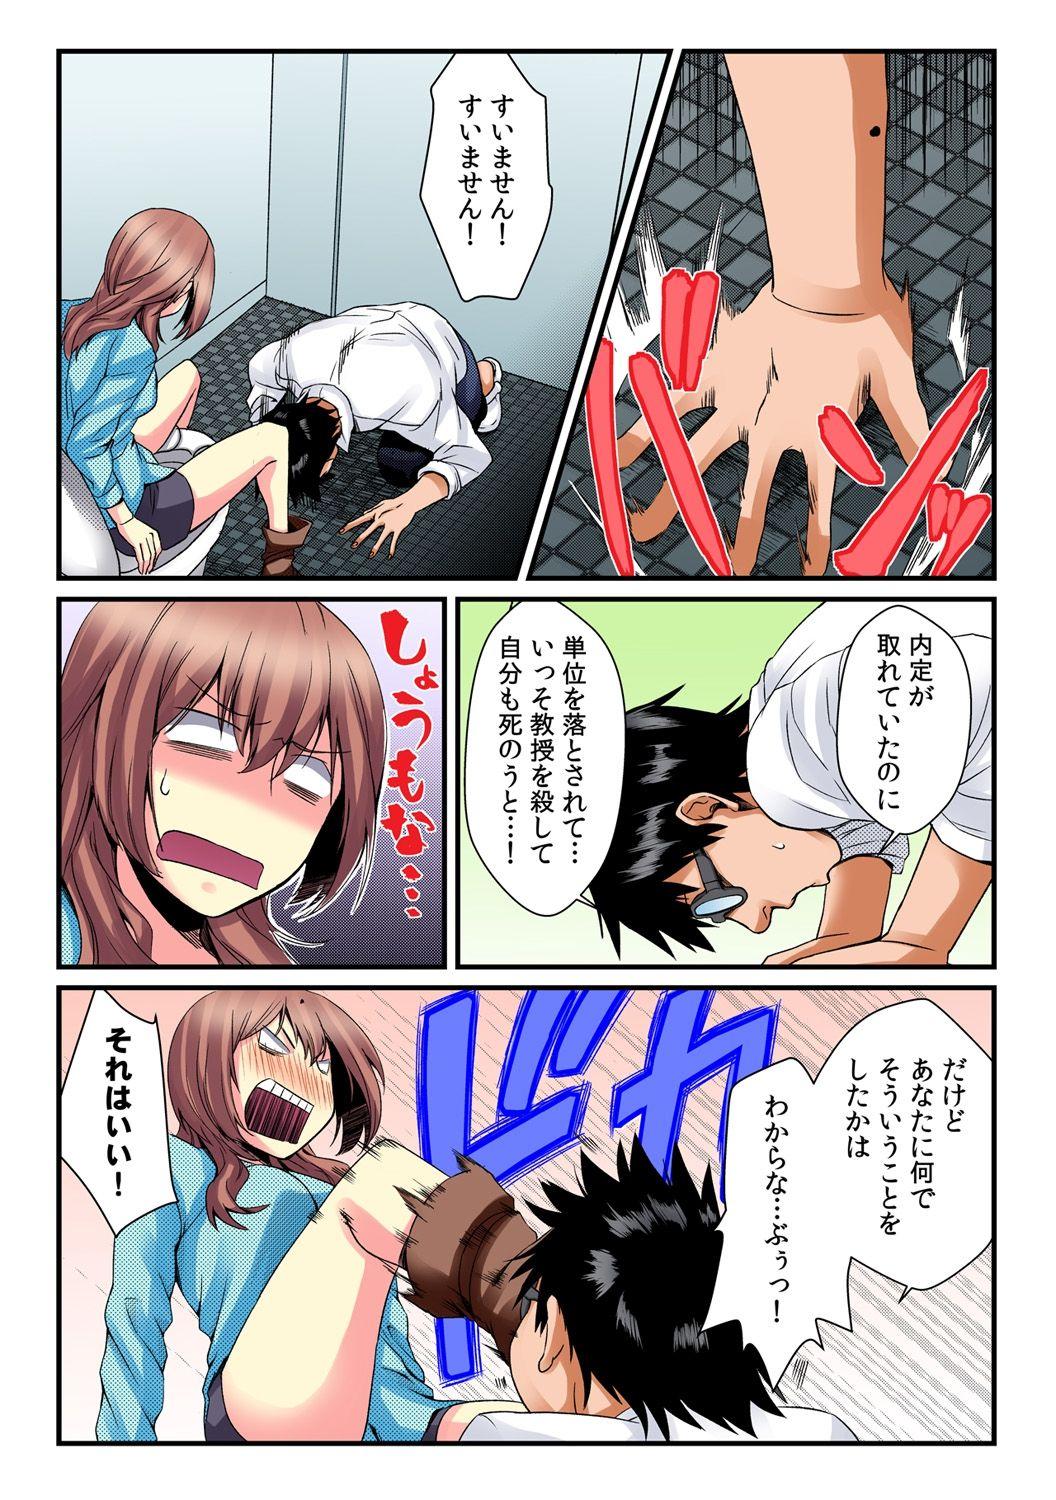 [Akagi Gijou / Akahige] I became a girl- and I definitely can't let anyone find out! (Full color) 2 28